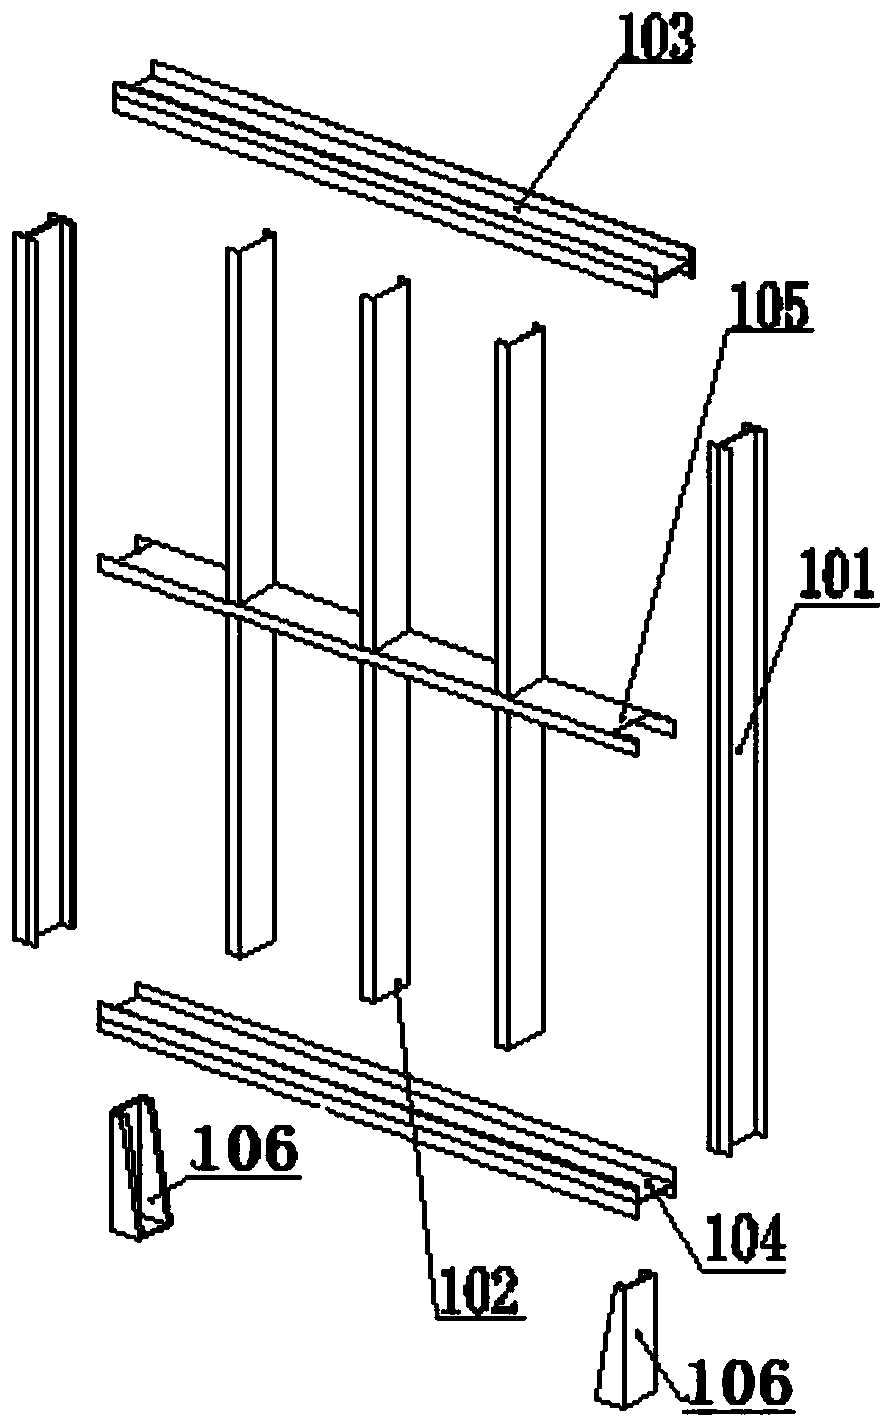 An anti-seismic test device and installation method of a prefabricated cold-formed thin-walled steel wall